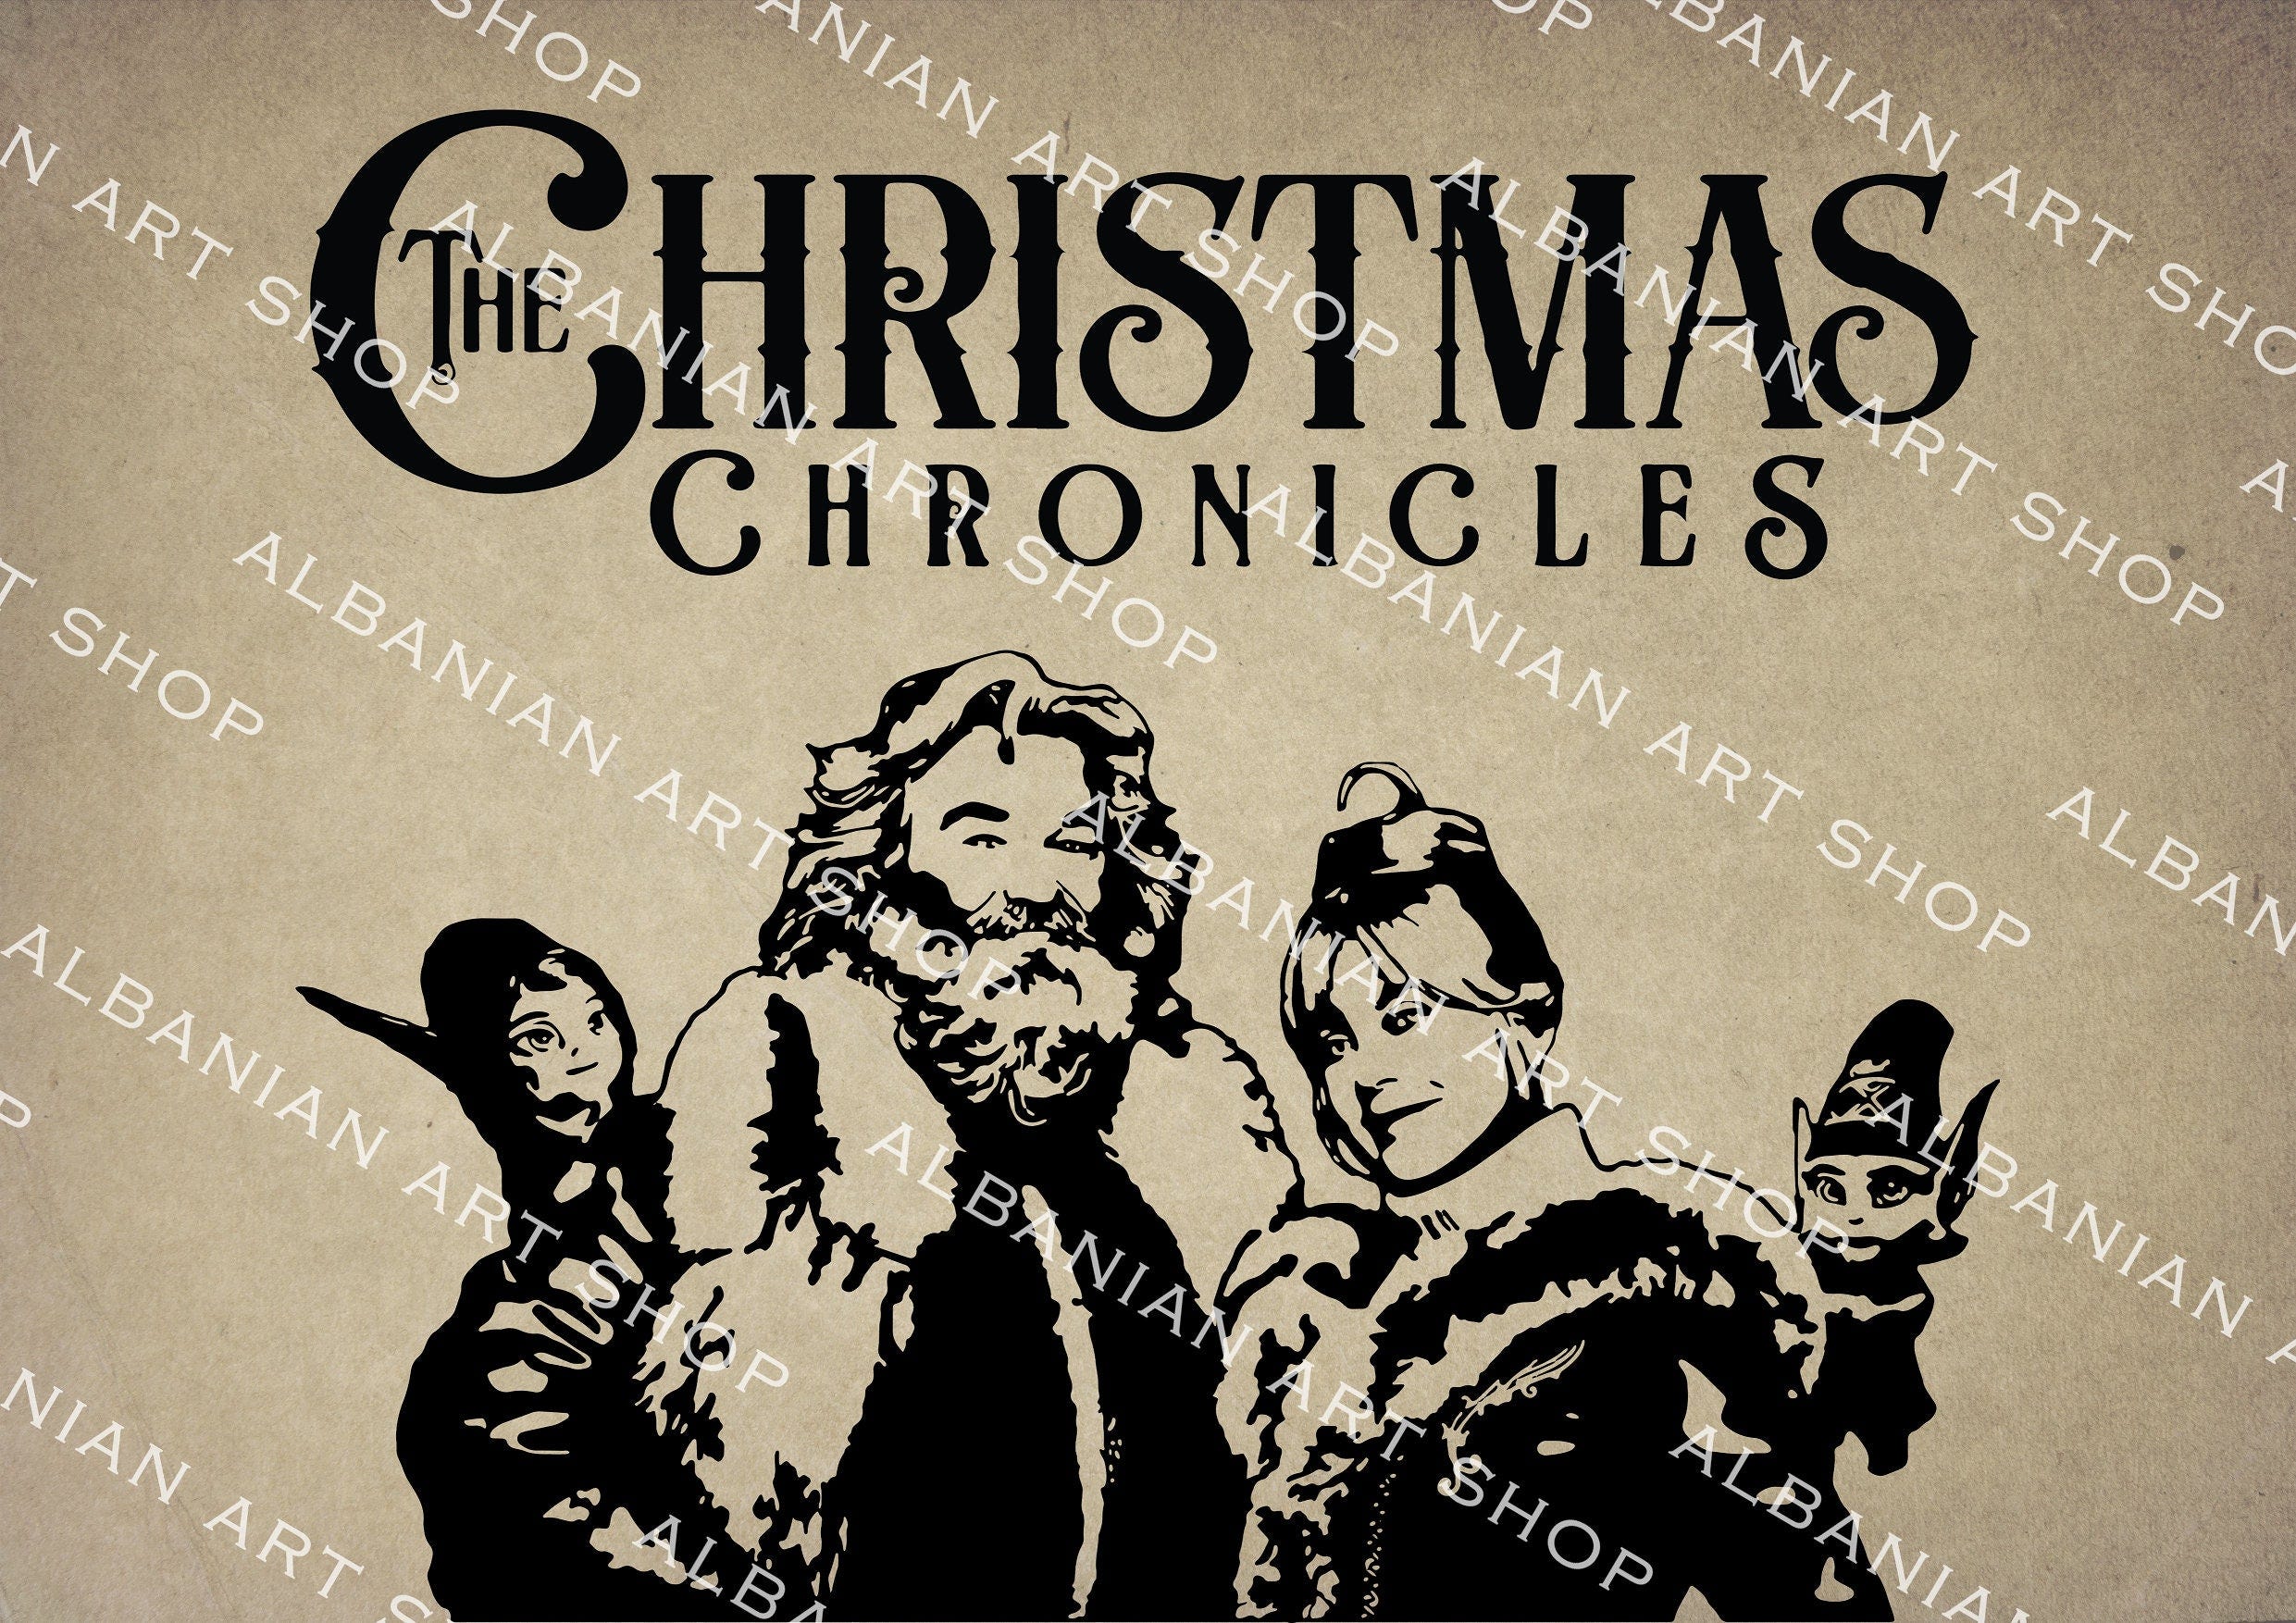 Instant Digital SVG PNG JPG Ai The The Christmas Chronicles  silhouette, vector, clipart, instant download. Wall art decor